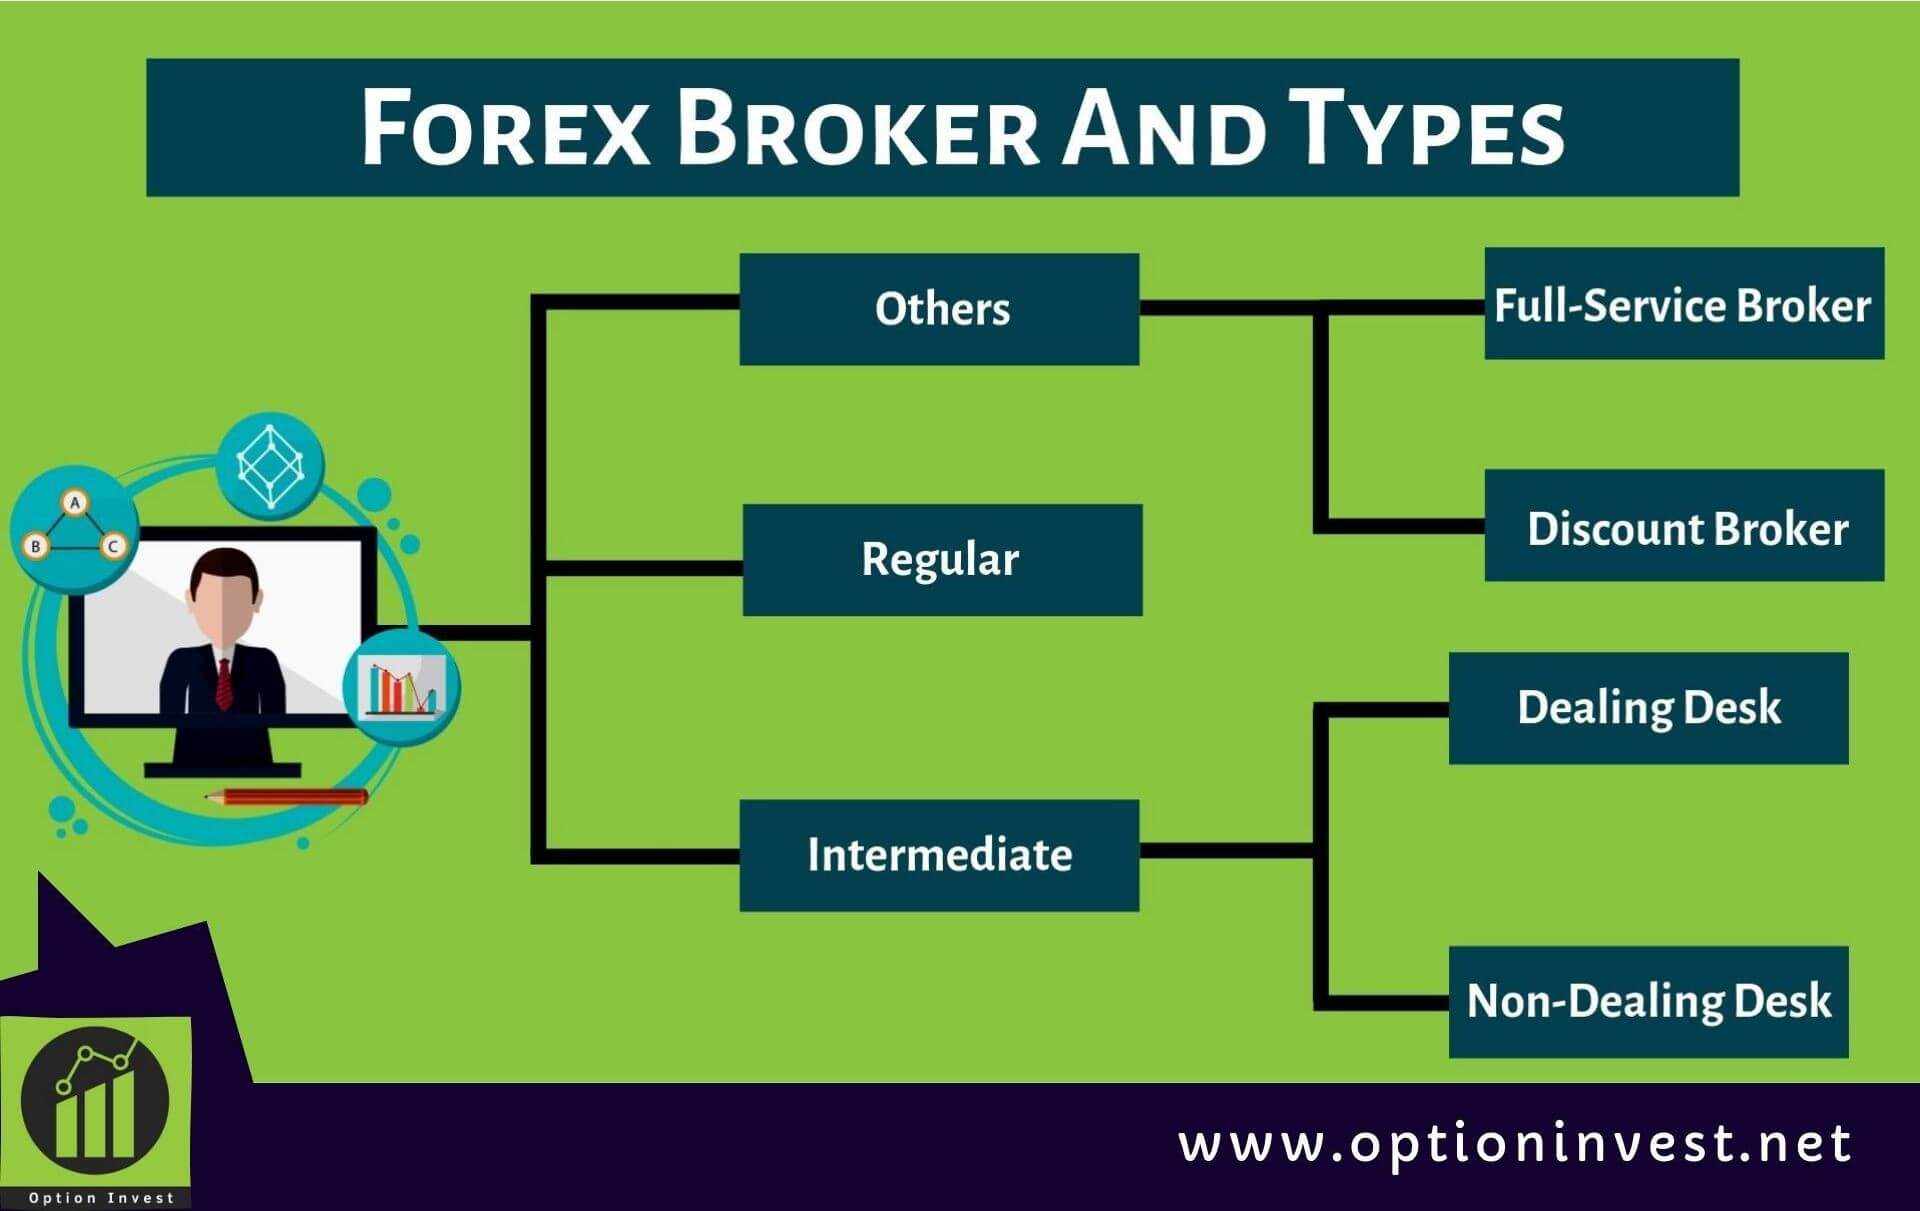 3. 5 Signs You Need an Institutional Forex Broker Instead of a Retail Forex Broker 